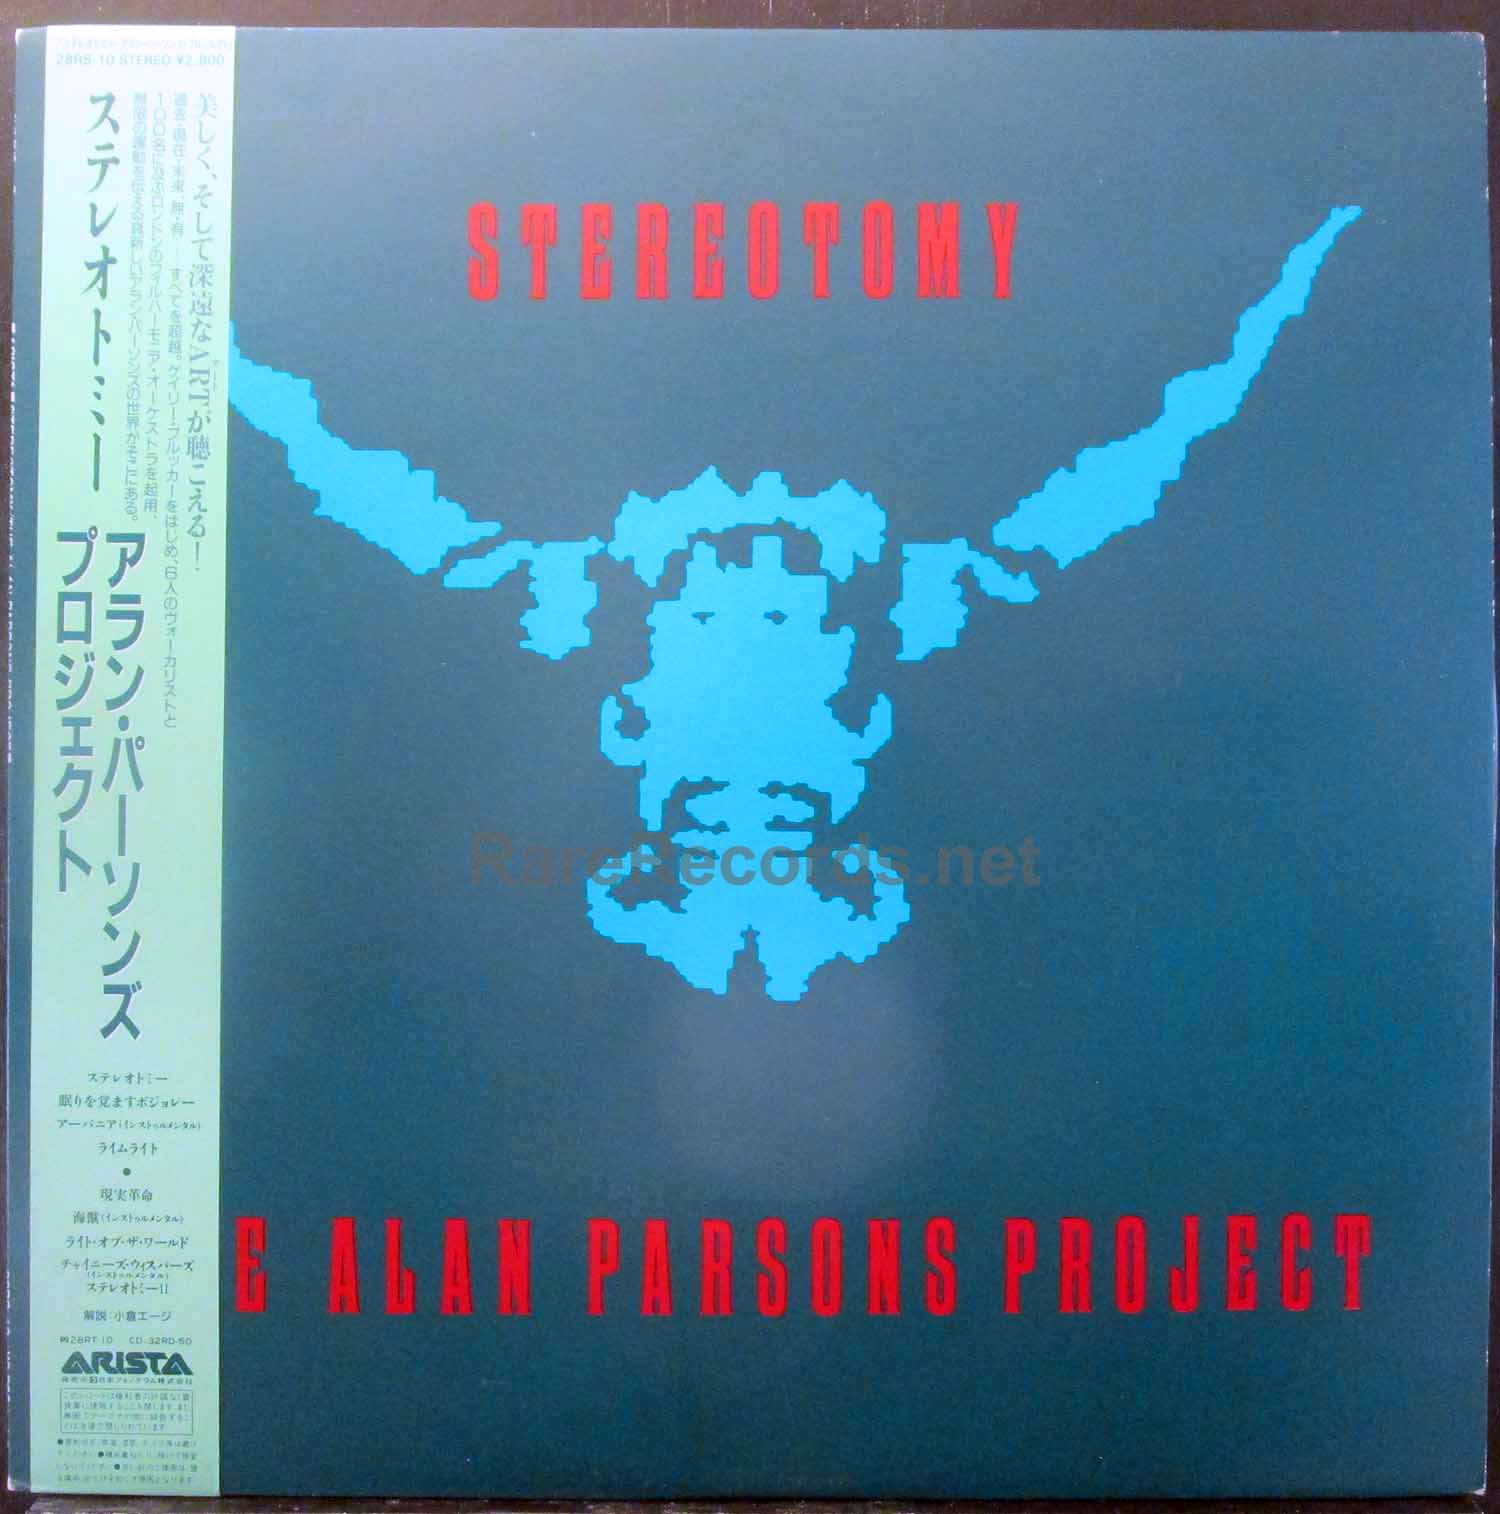 Alan Parsons Project - Stereotomy Japan LP